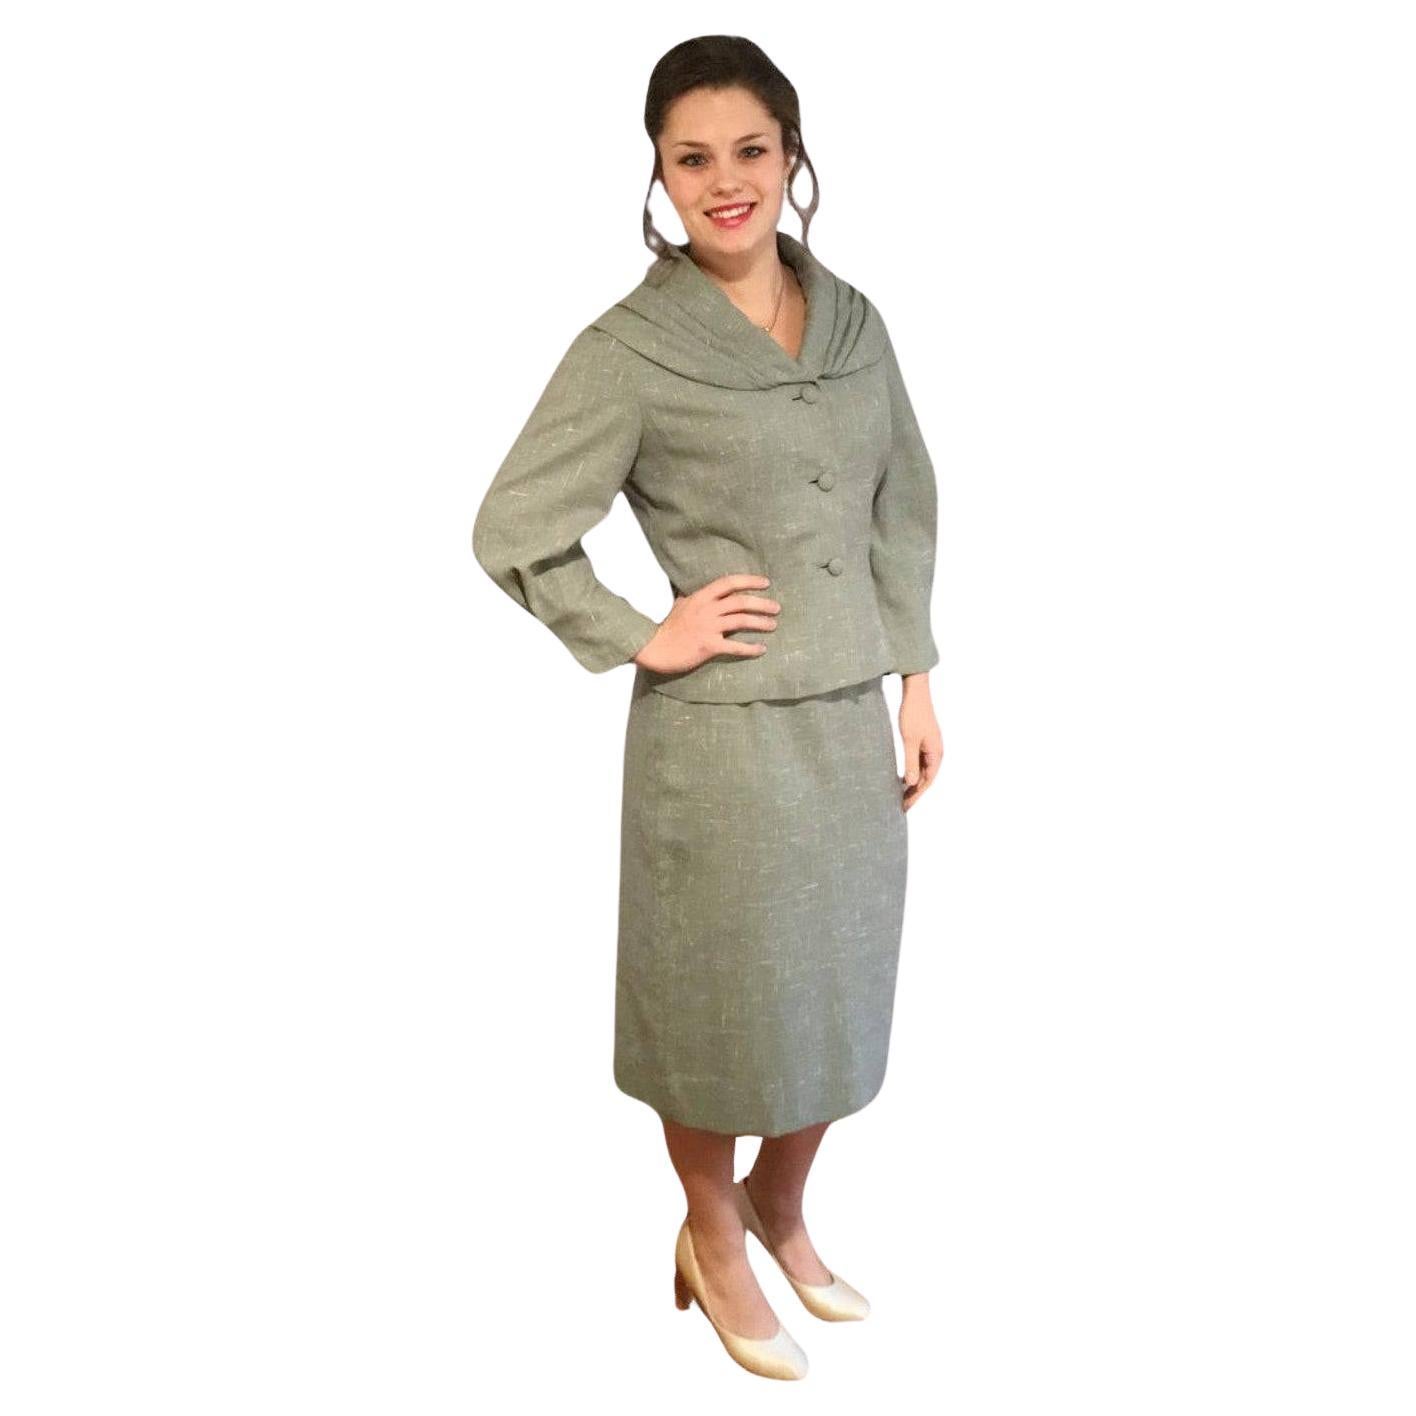 Lilli Ann Vintage Grey Green Pencil Skirt Suit with Sailor Collar Circa 1950s SM For Sale